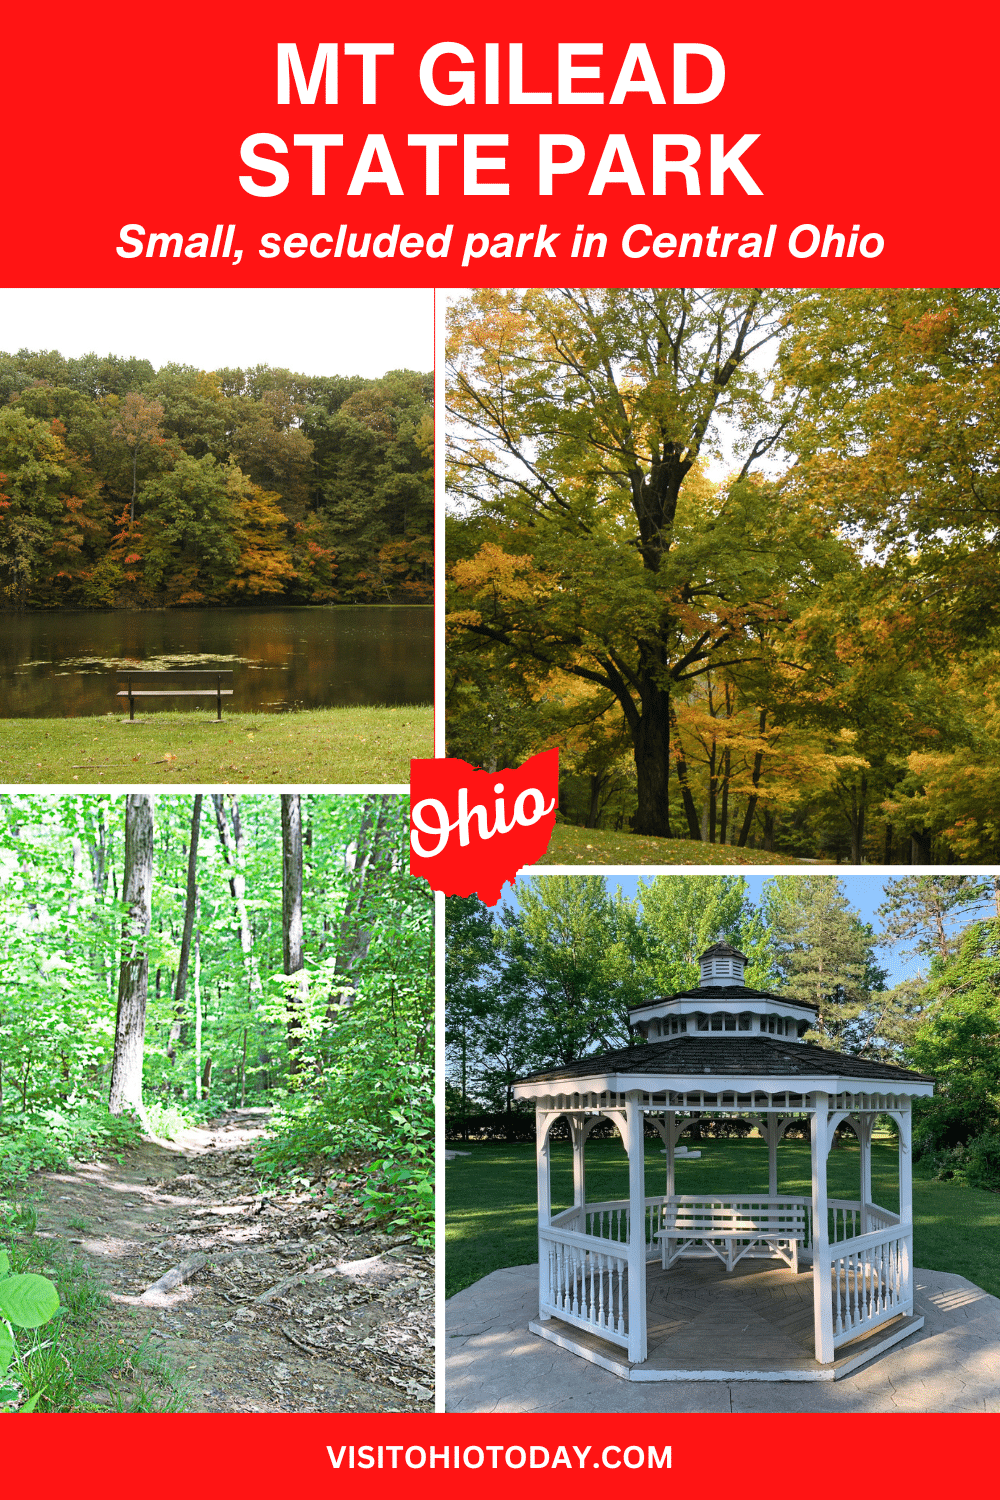 Mt. Gilead State Park is a small, secluded park in Morrow County, Central Ohio. It has plenty of activities and facilities for all visitors!